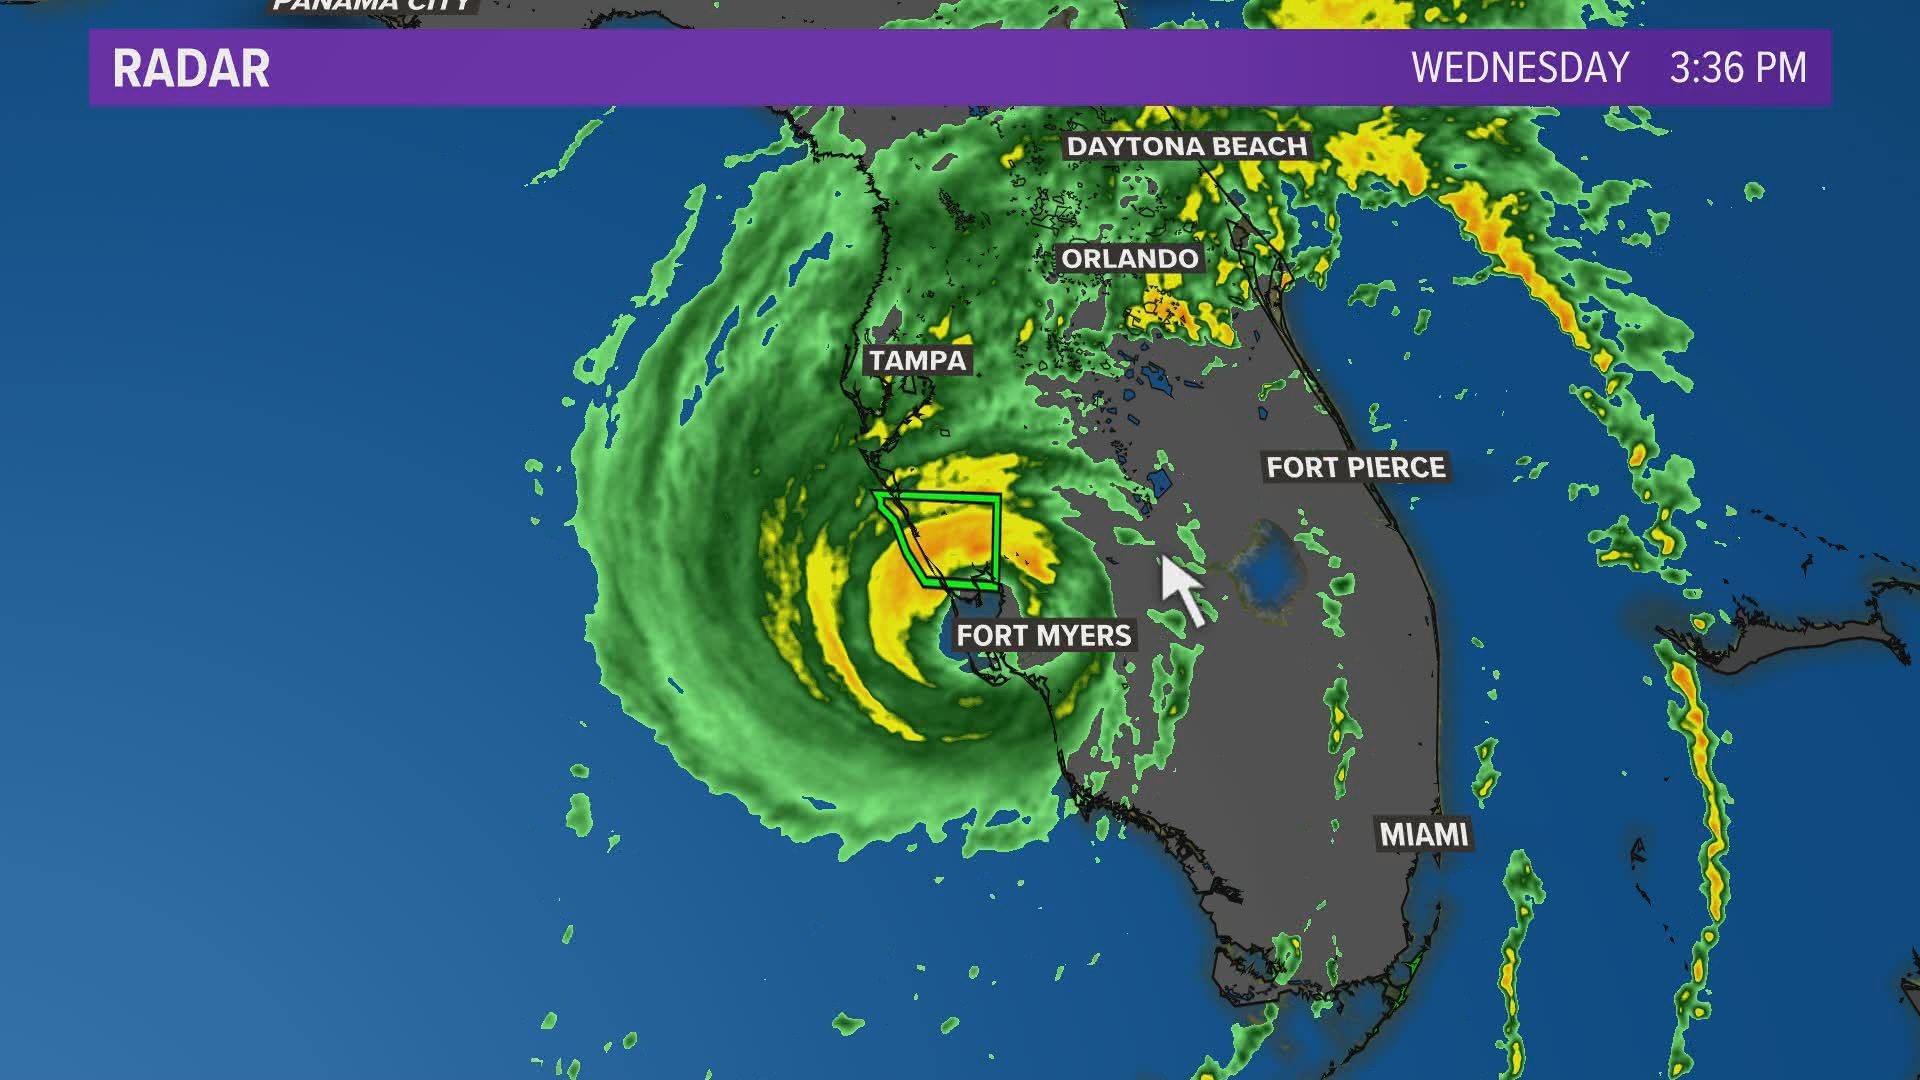 The eye of Hurricane Ian made landfall near Cayo Costa, Florida as a Category 4 storm with winds of 150 mph, bringing storm surge flooding to the Florida gulf coast.